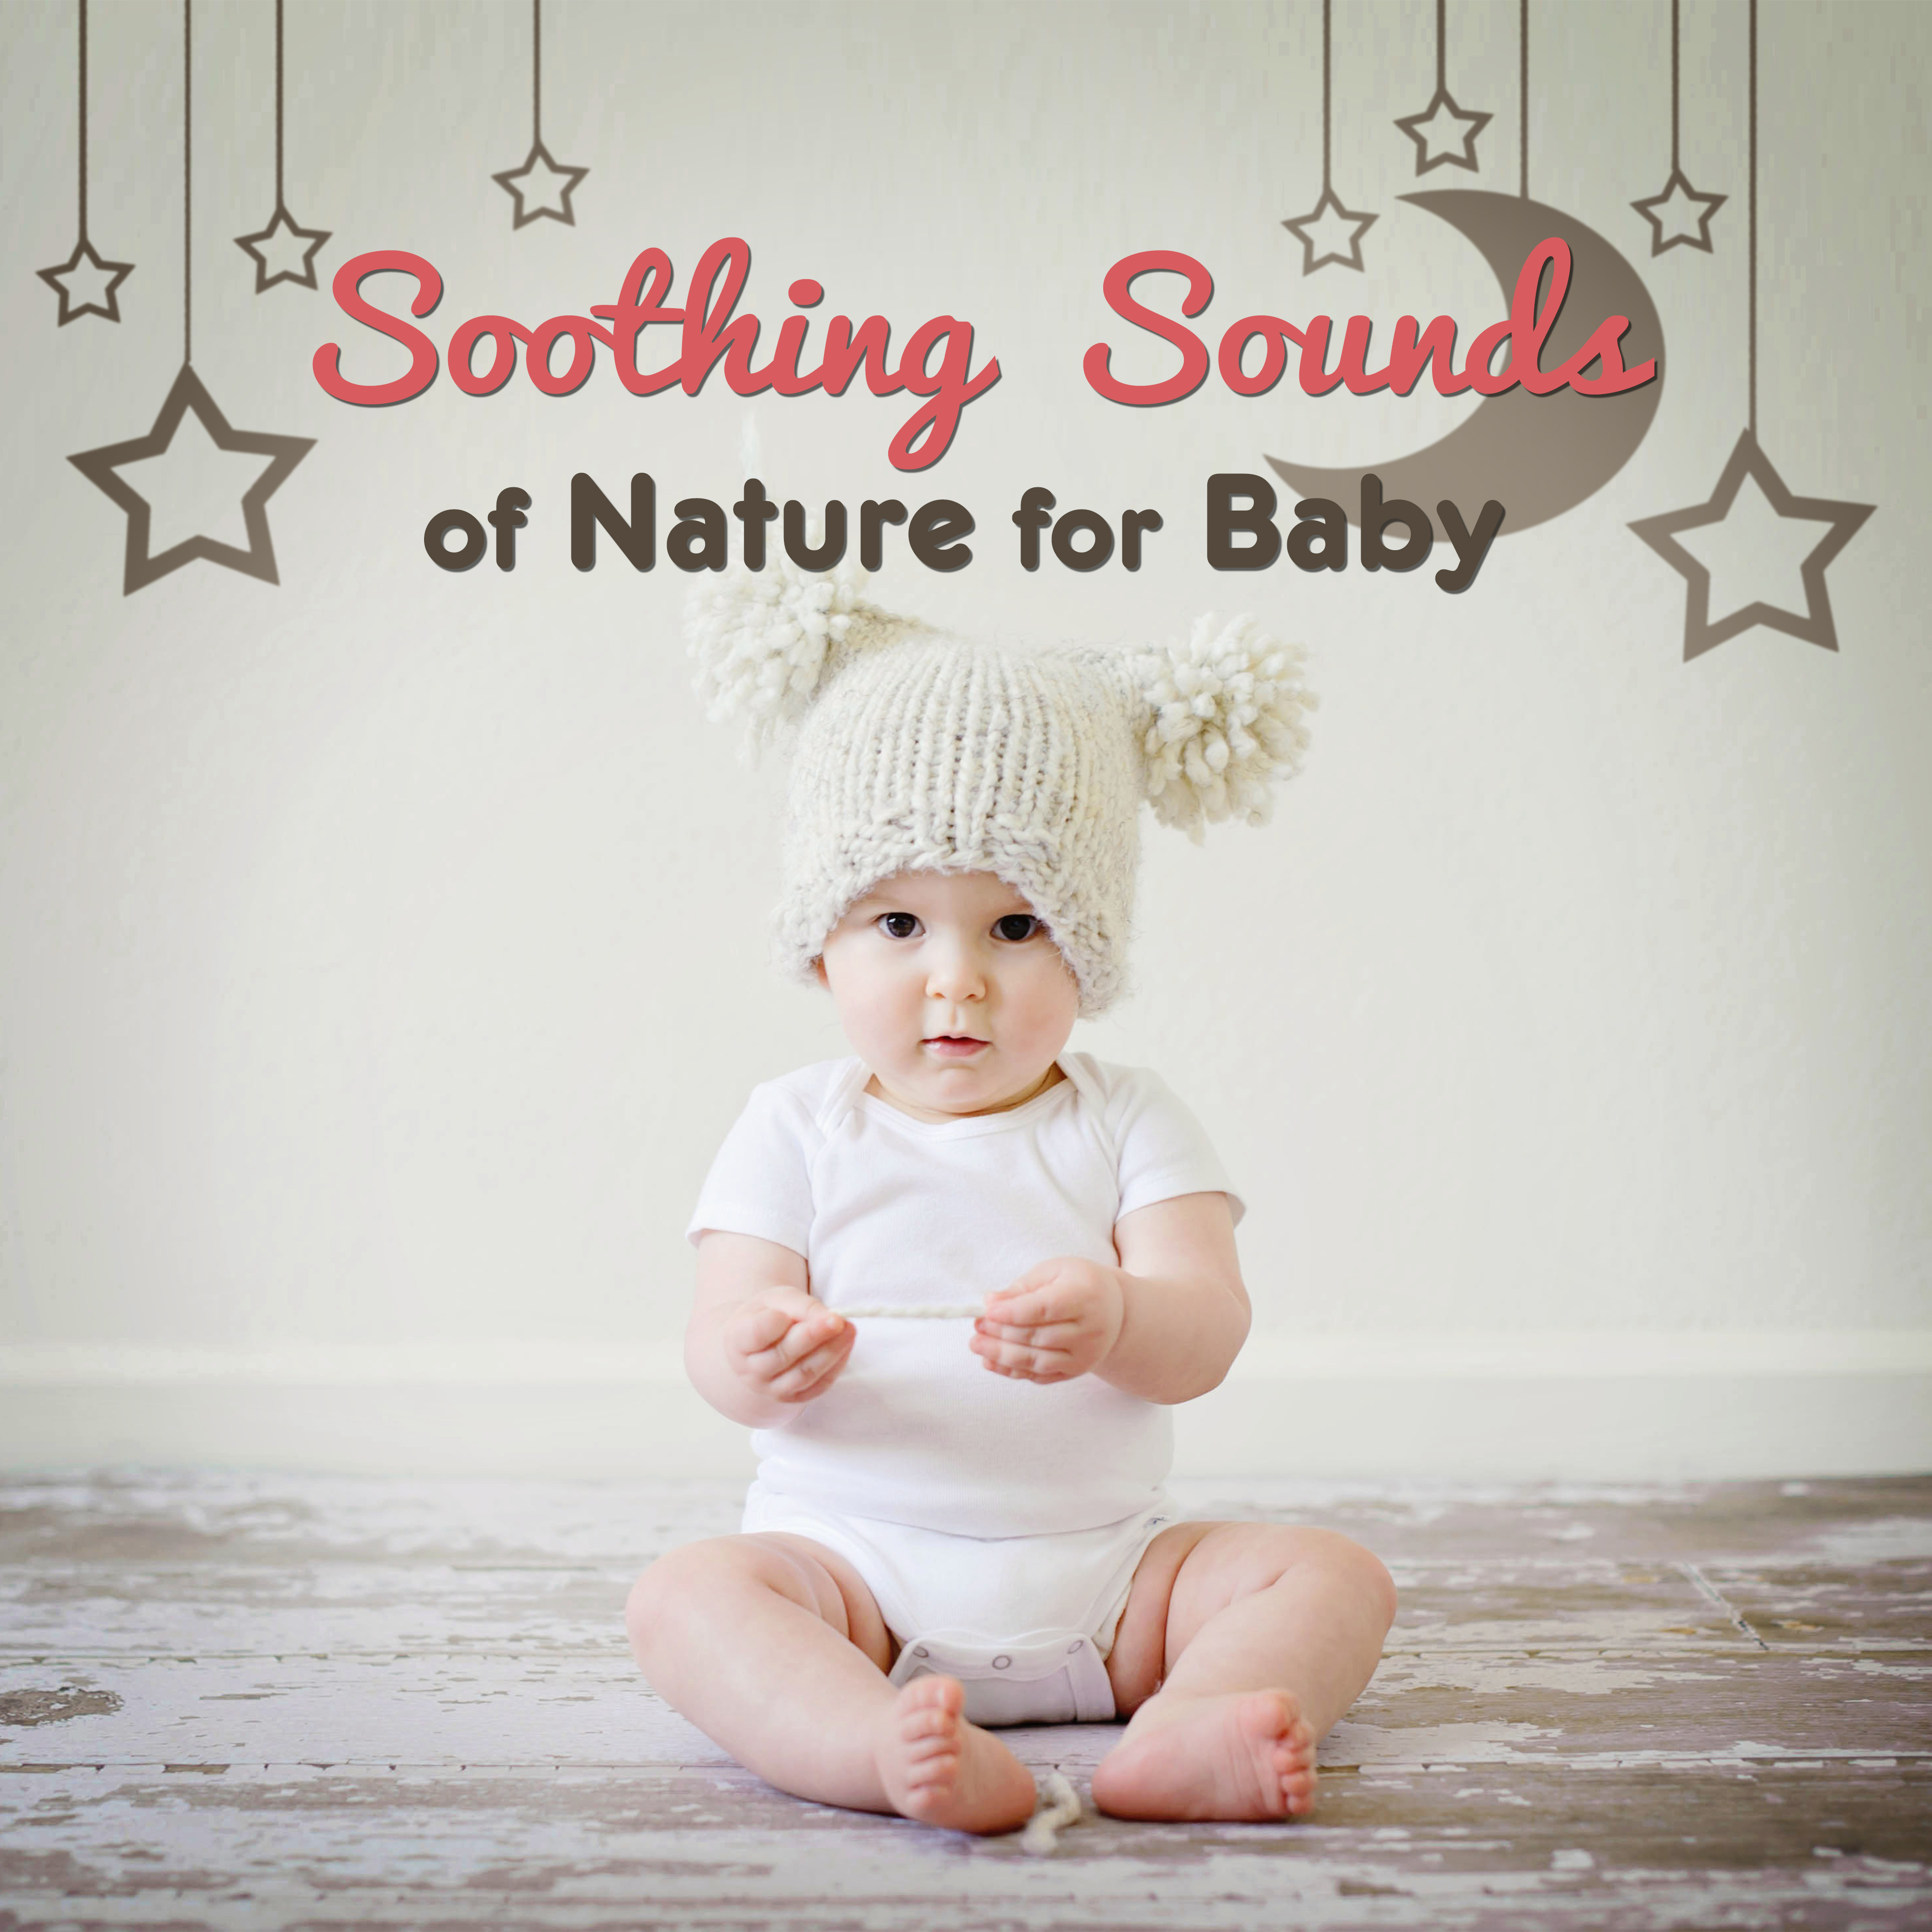 Soothing Sounds of Nature for Baby  Restful Sleep, Music to Calm Down, Cradle Songs, Lullabies at Night, Relax, Bedtime